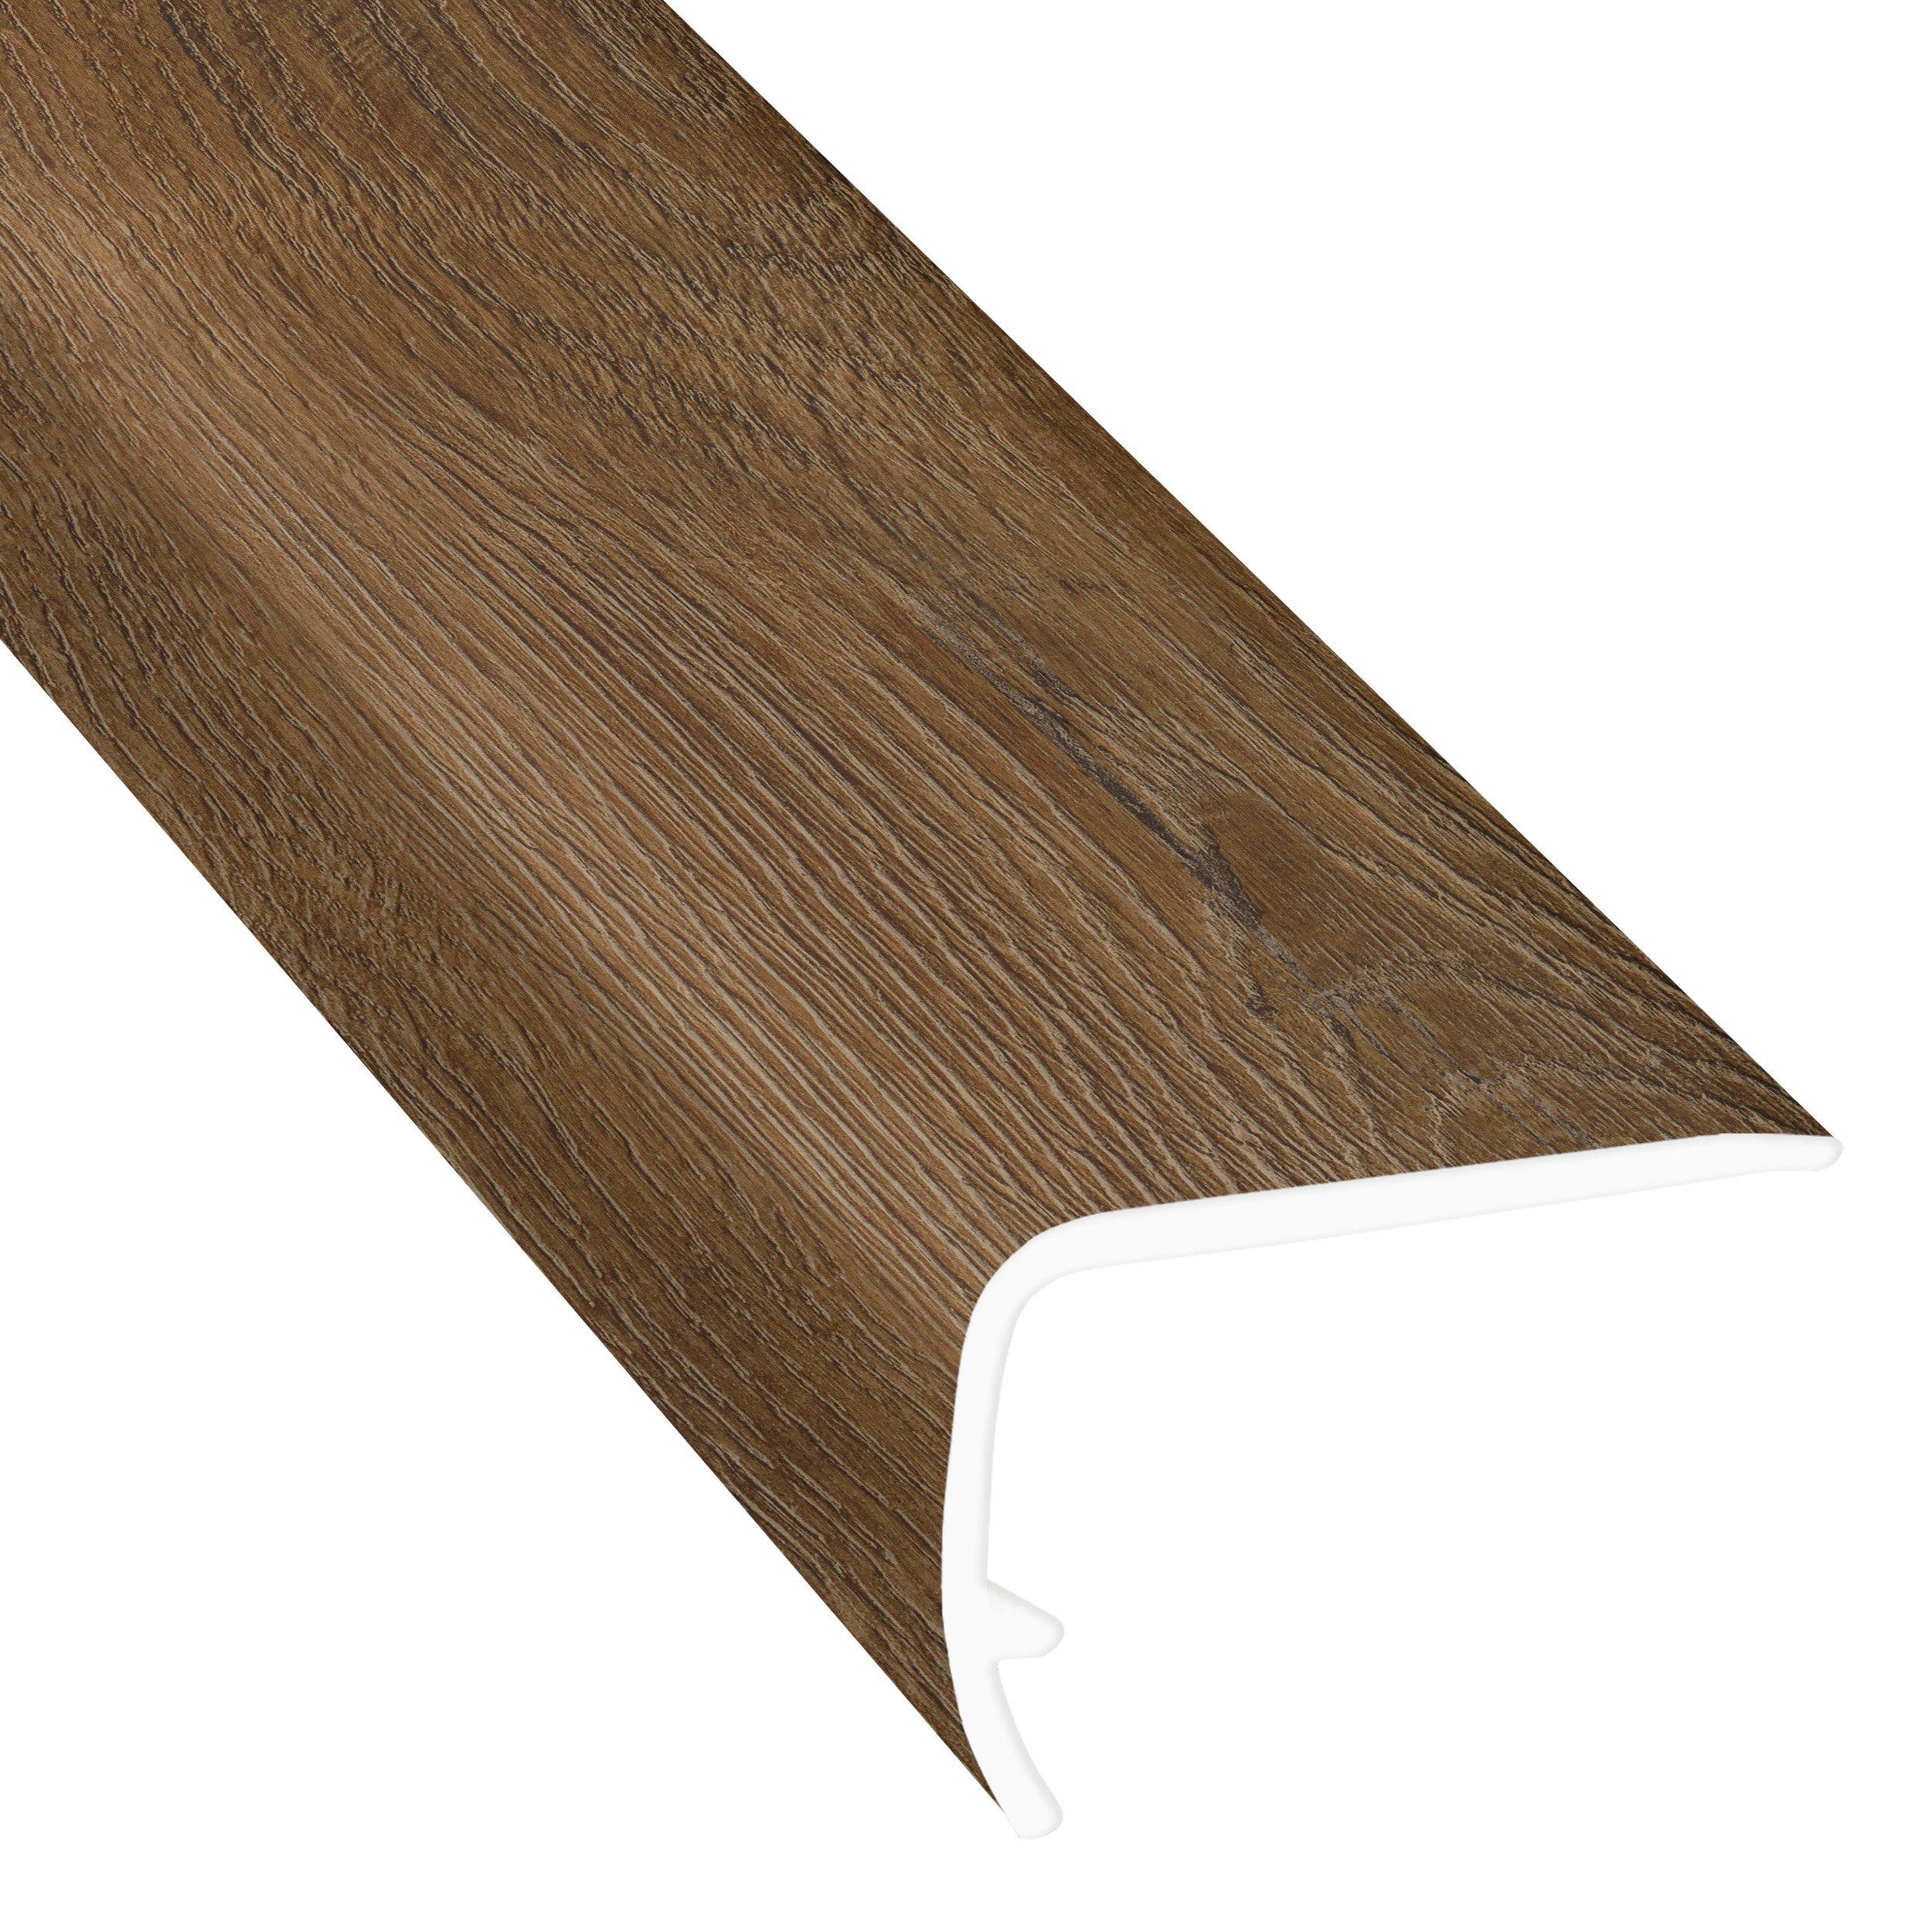 Tuscan Sunset 94in. Vinyl Overlapping Stair Nose